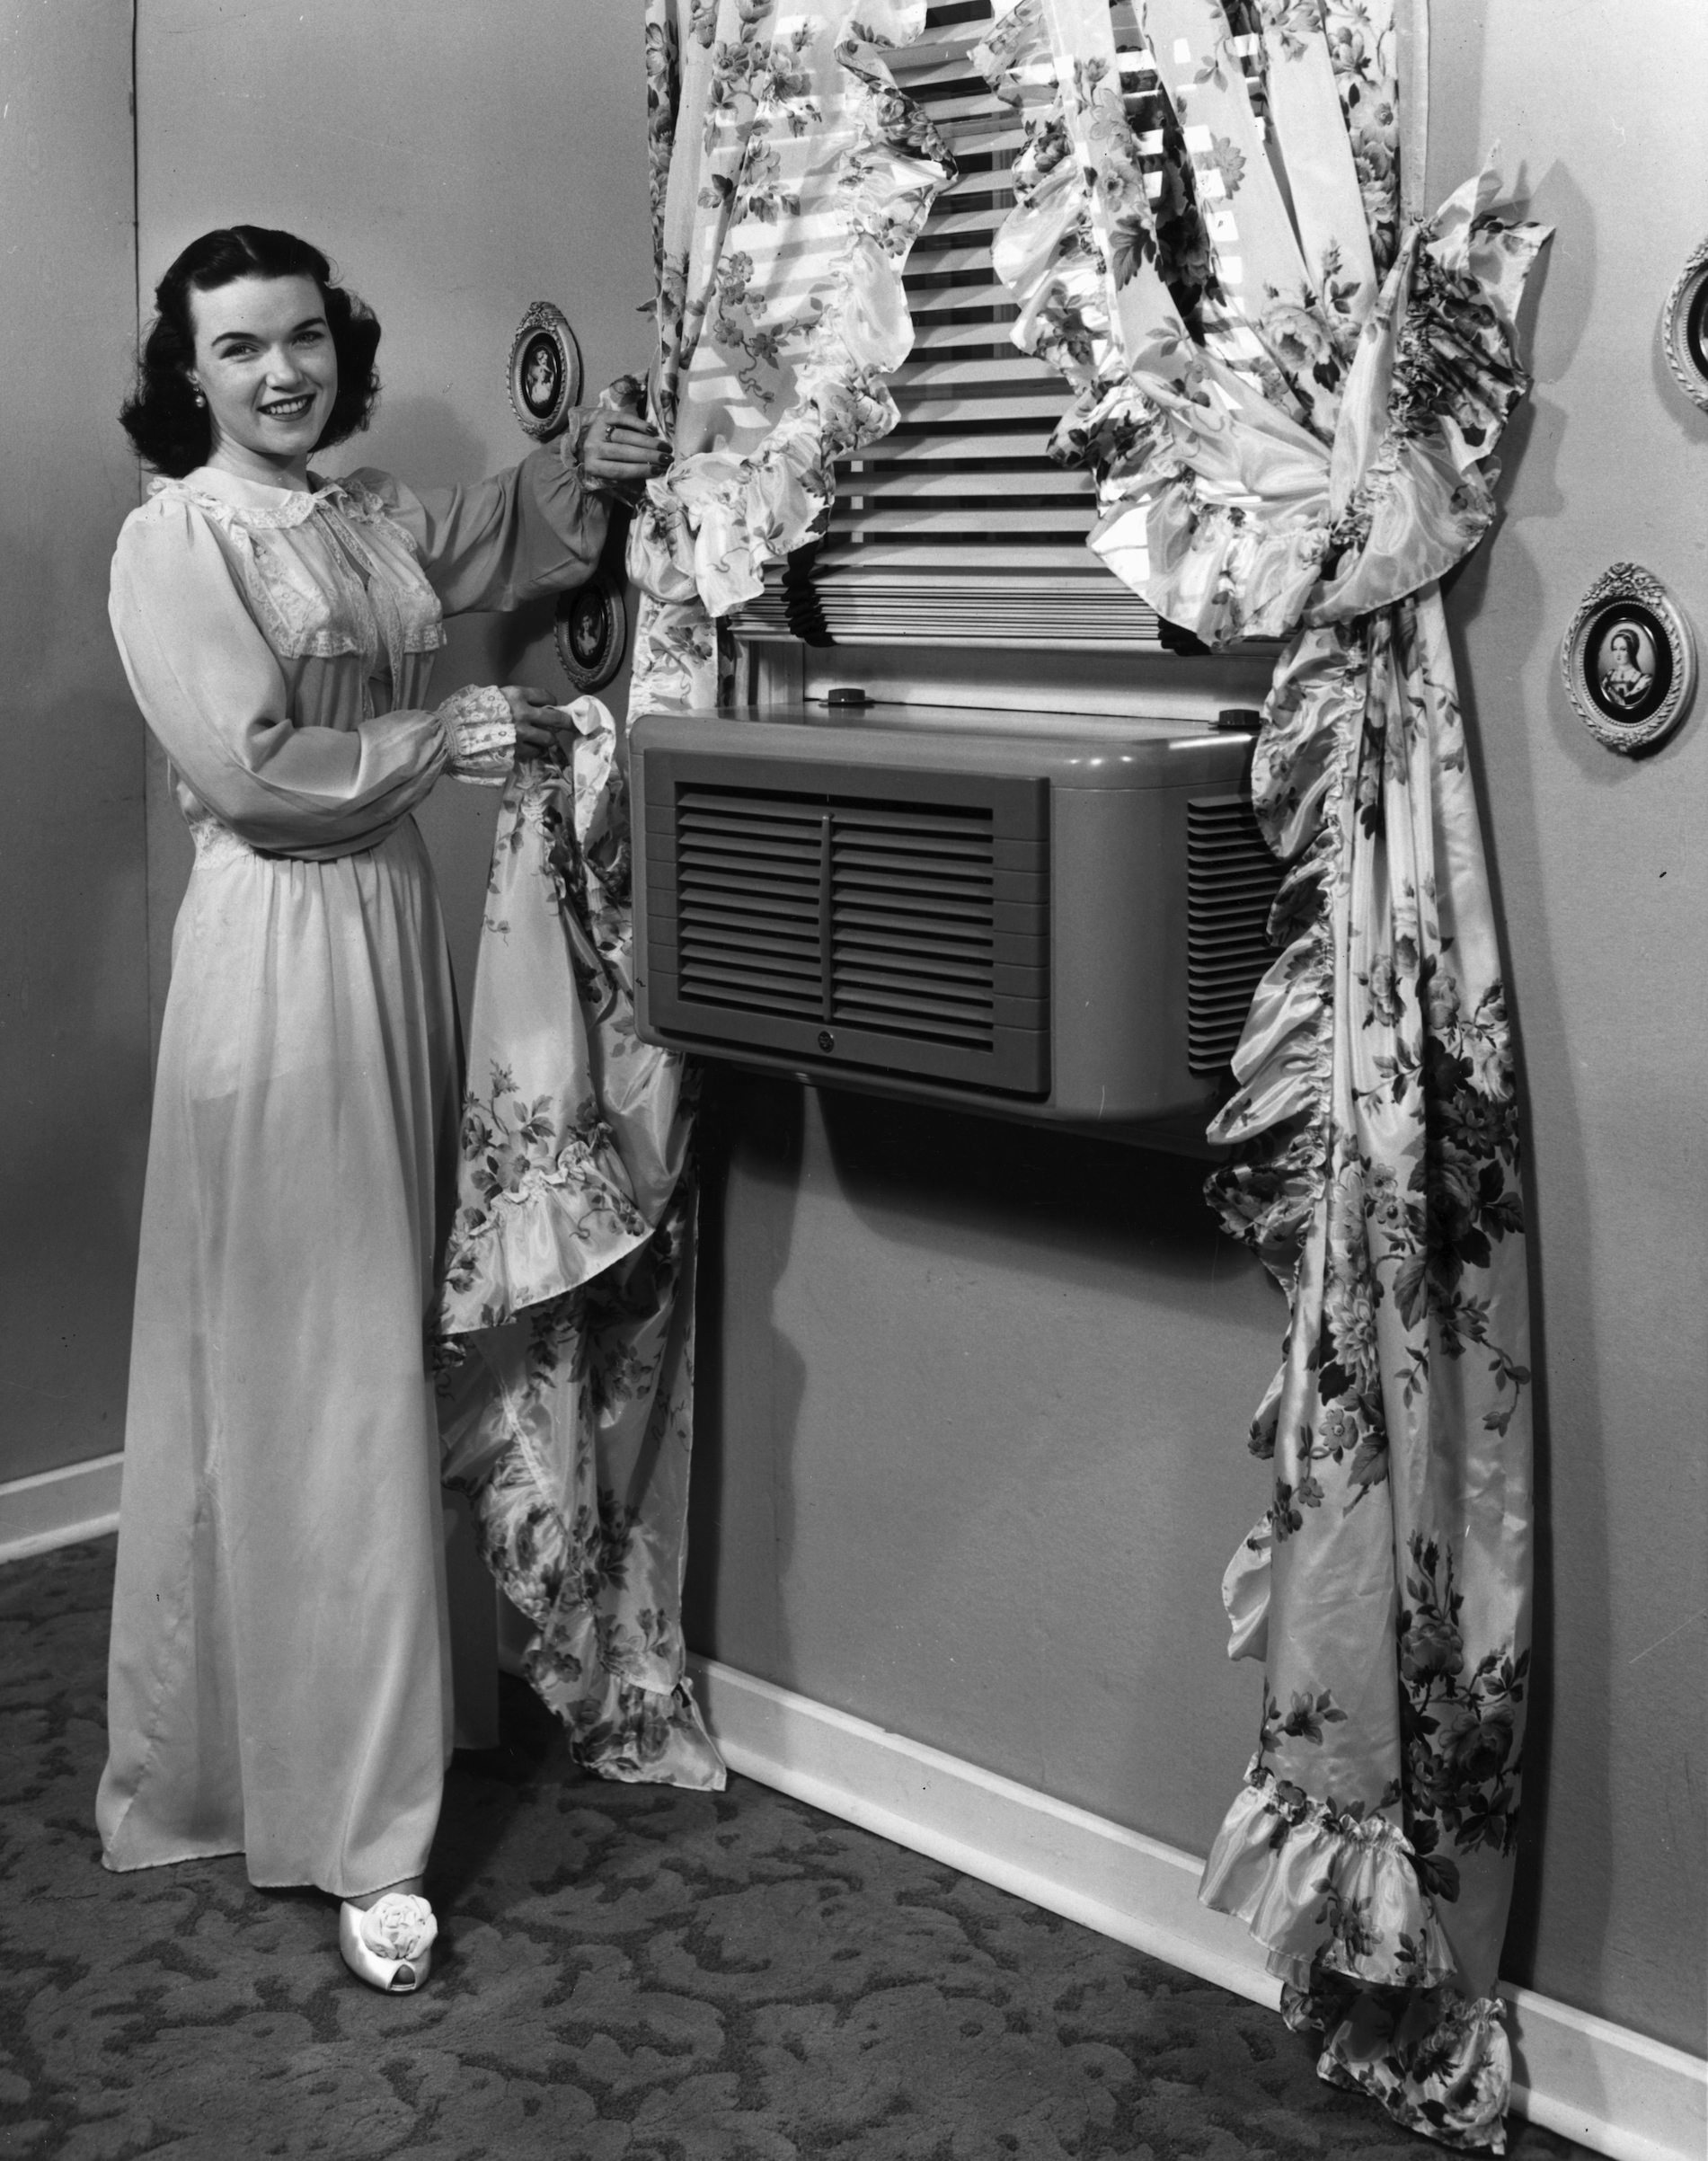 circa 1945:  A woman dressed in a long nightgown pulls a ruffled floral print curtain back to show a modern air conditioner mounted in the window. (Lambert/Getty Images)